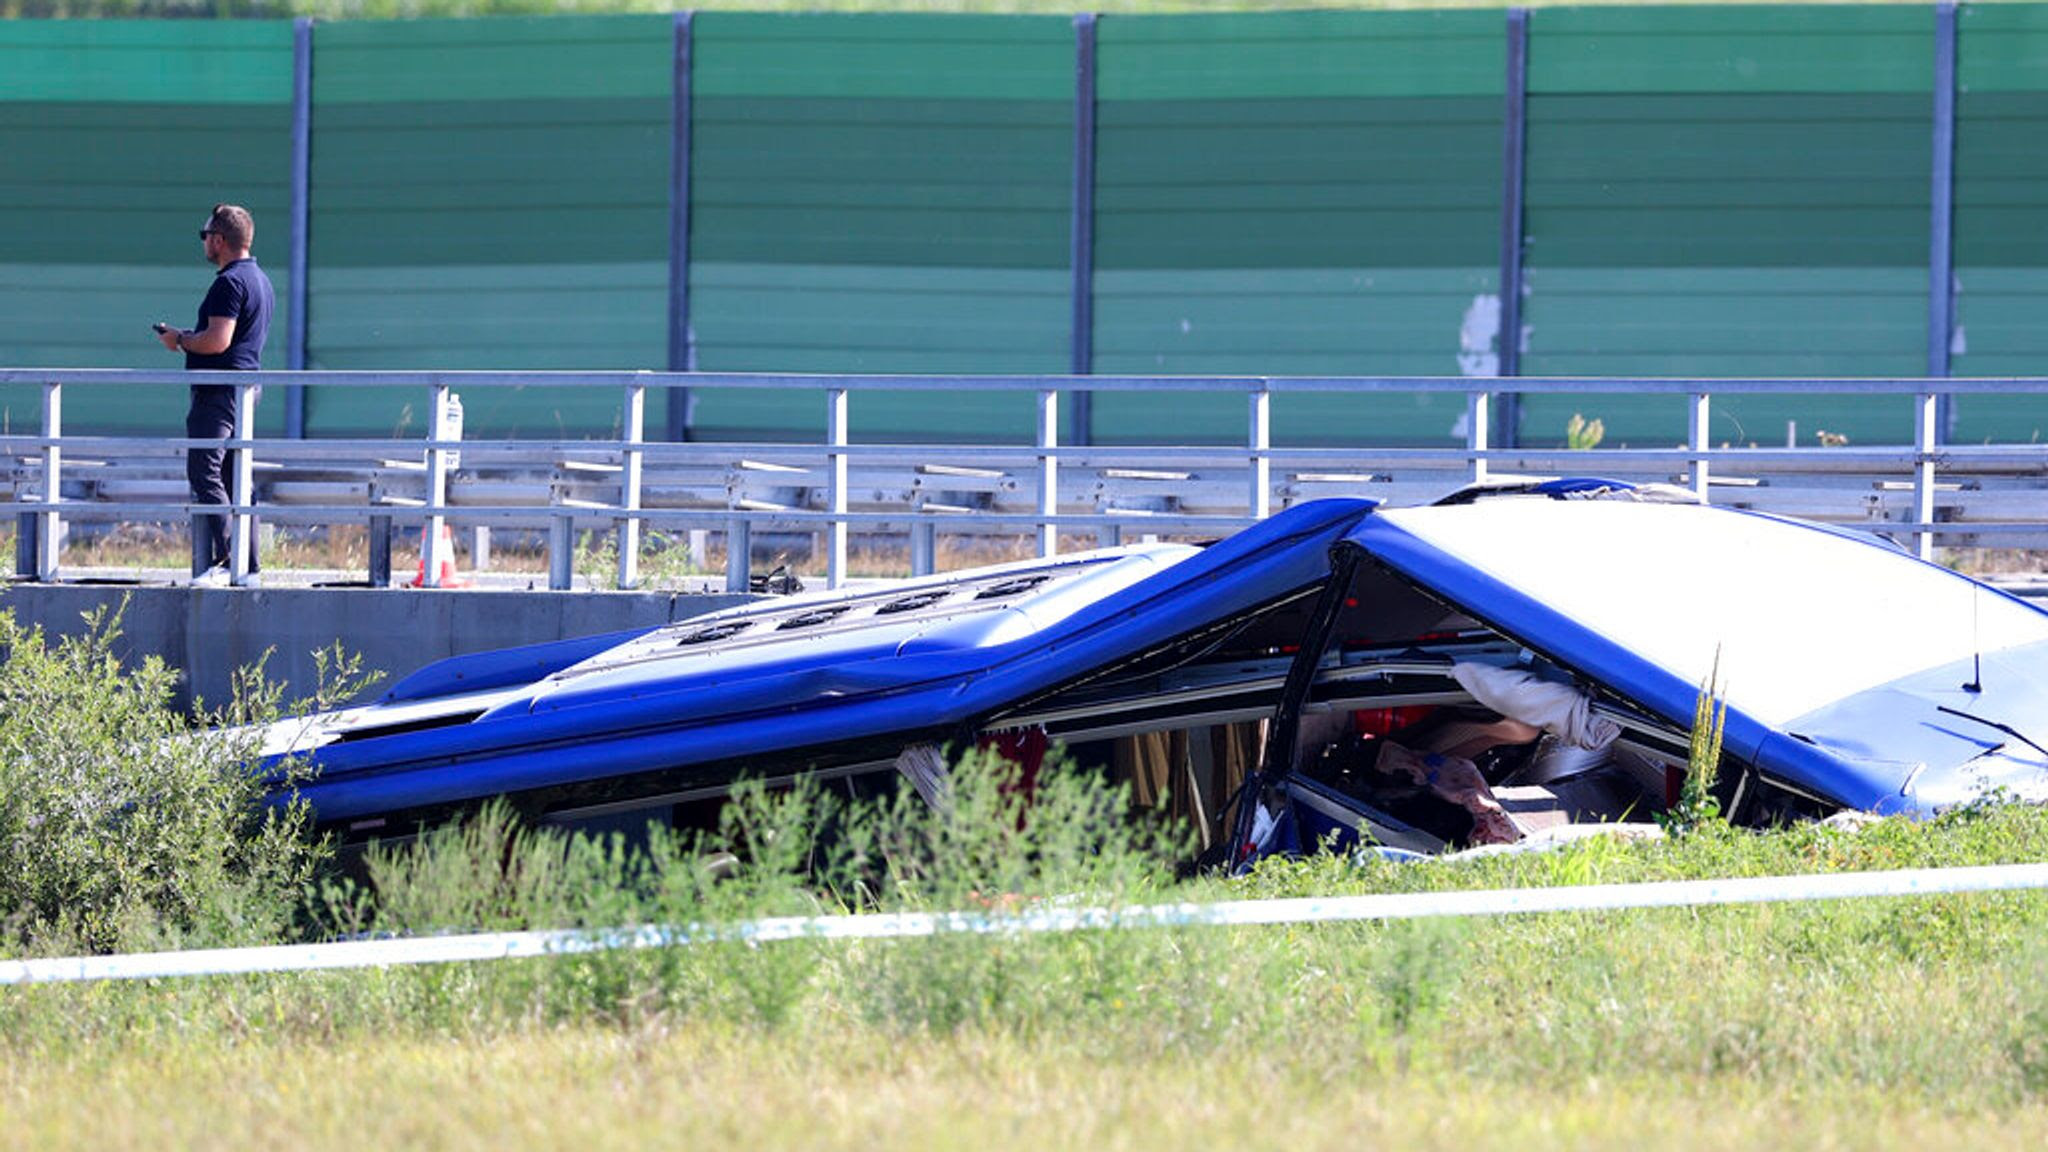 At least 12 dead and 43 injured after Polish bus carrying religious pilgrims crashes in Croatia